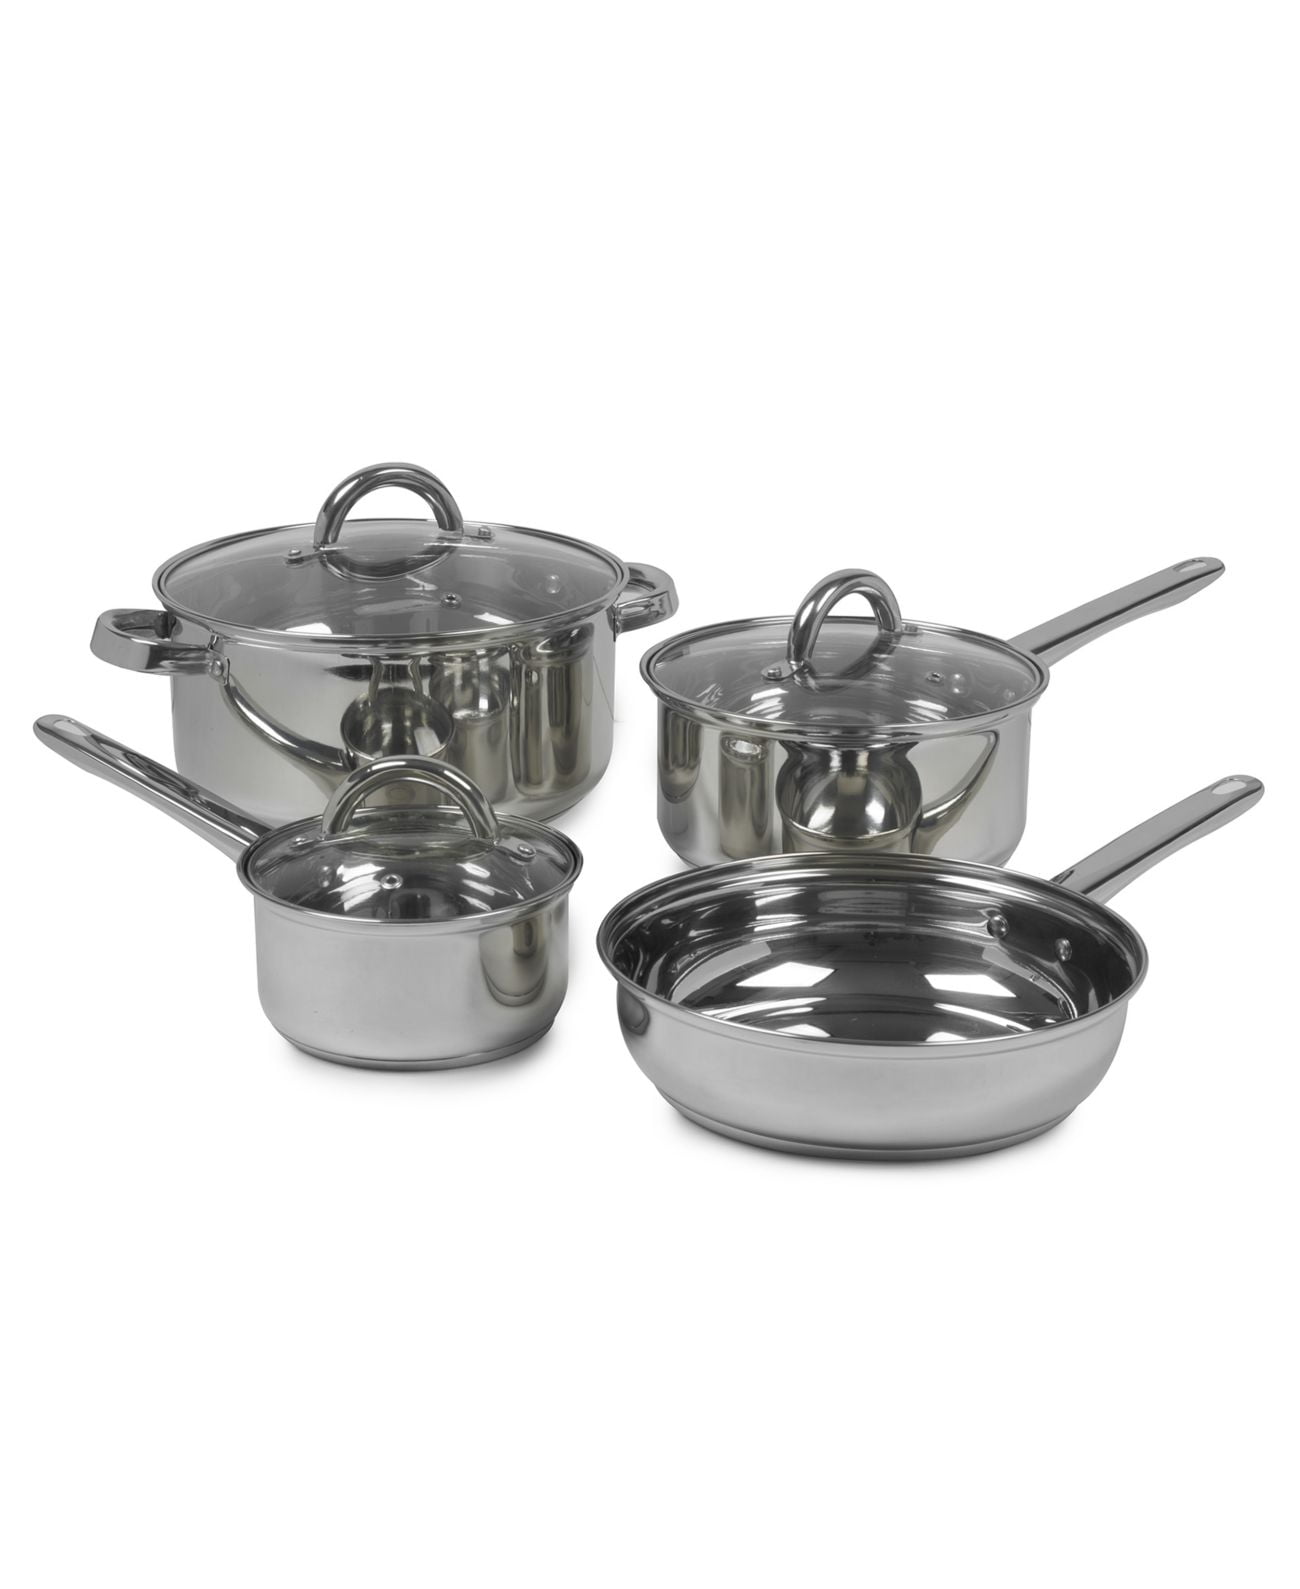 Sabichi set of 3 Stainless Steel Pots Pan Set & Glass Lids Gift Boxed Induction 